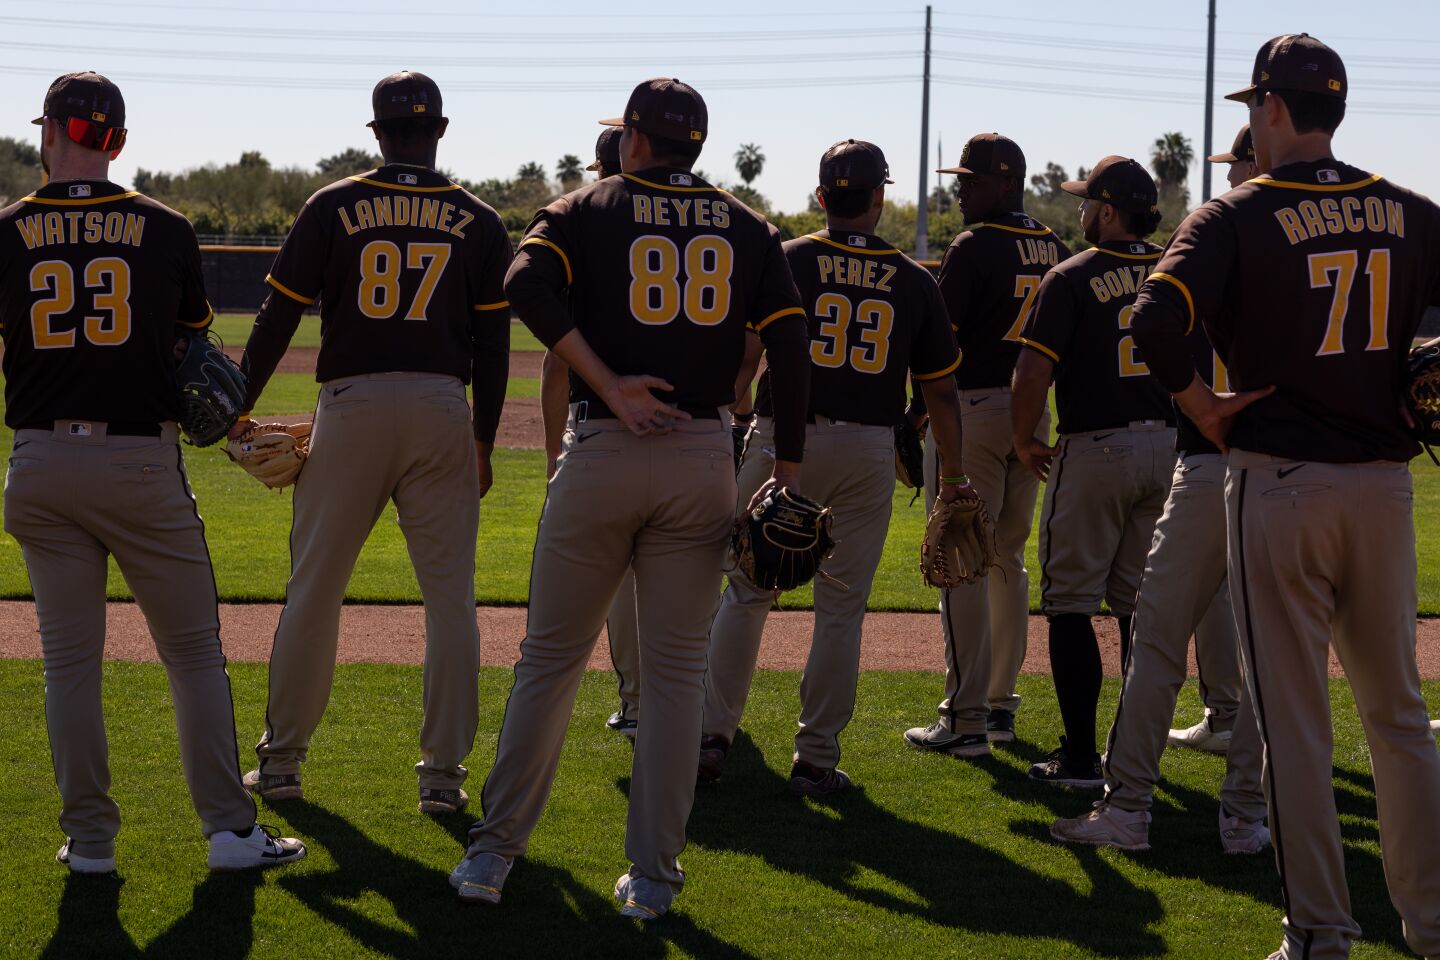 PEORIA, AZ - March 07: Padres minor league players practice on the first day of training camp at Peoria Sports Complex on Monday, March 7, 2022 in Peoria, AZ. (Caitlin O'Hara / For The San Diego Union-Tribune)